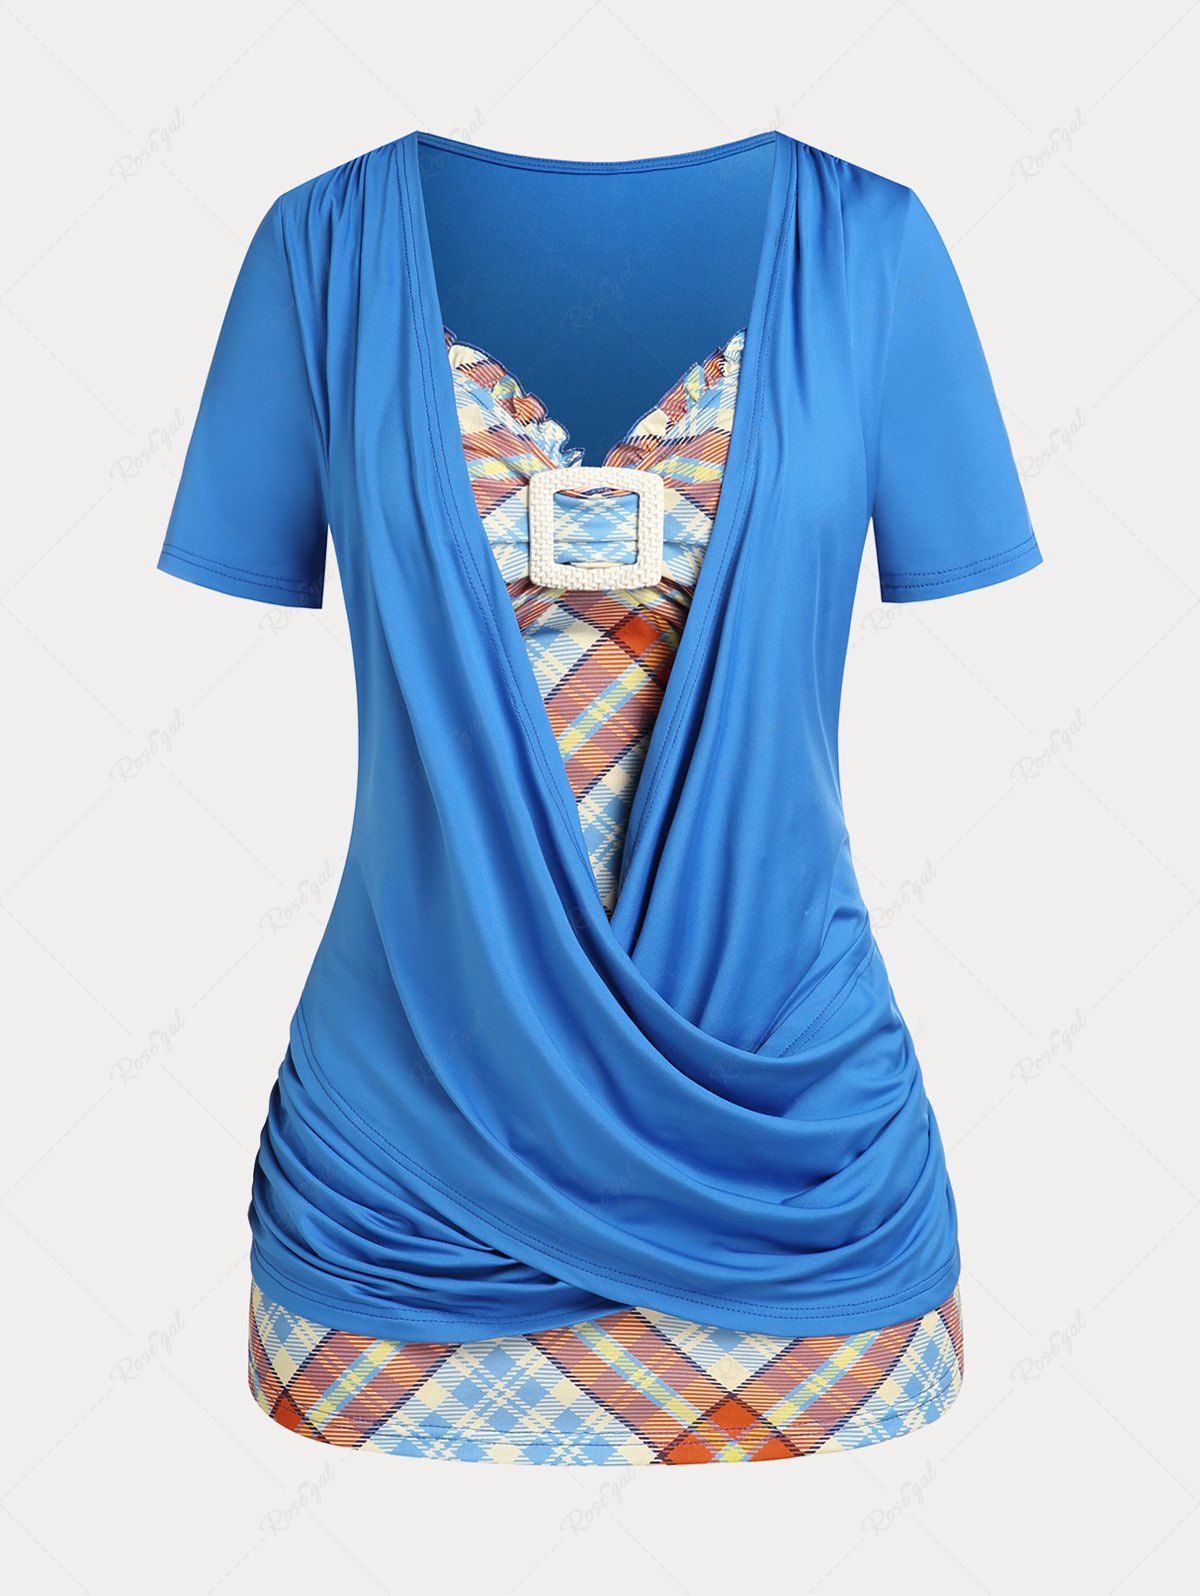 Sale Crossover Plaid Plus Size & Curve 2 in 1 Tee  